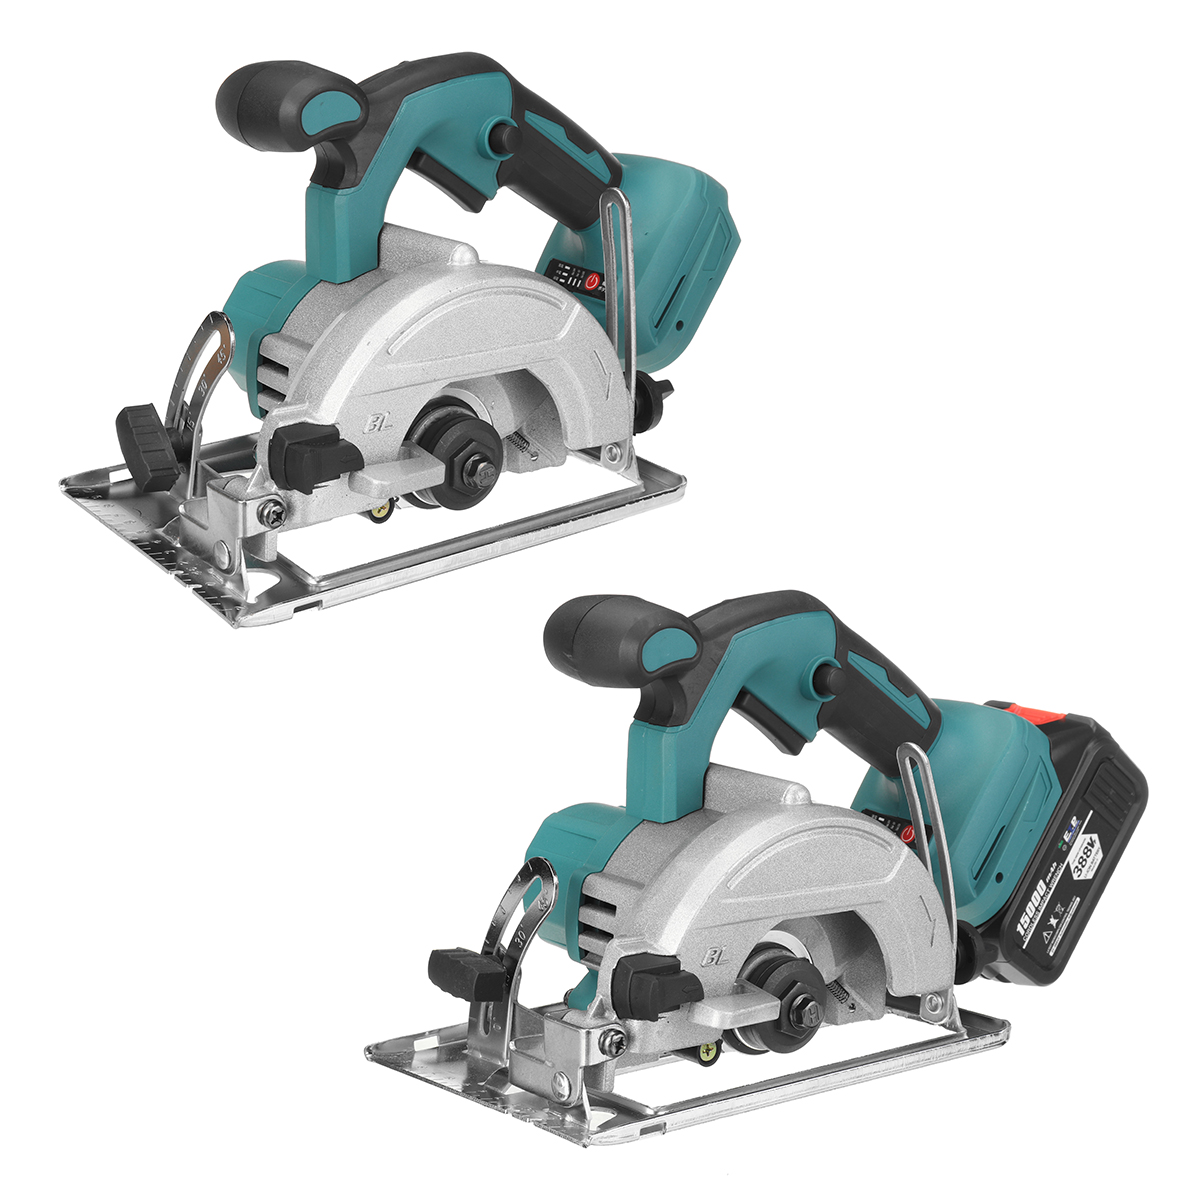 388VF-Electric-Circular-Saw-Woodworking-Wood-Wood-Cutter-W-None12-Battery-For-Makita-1859077-6